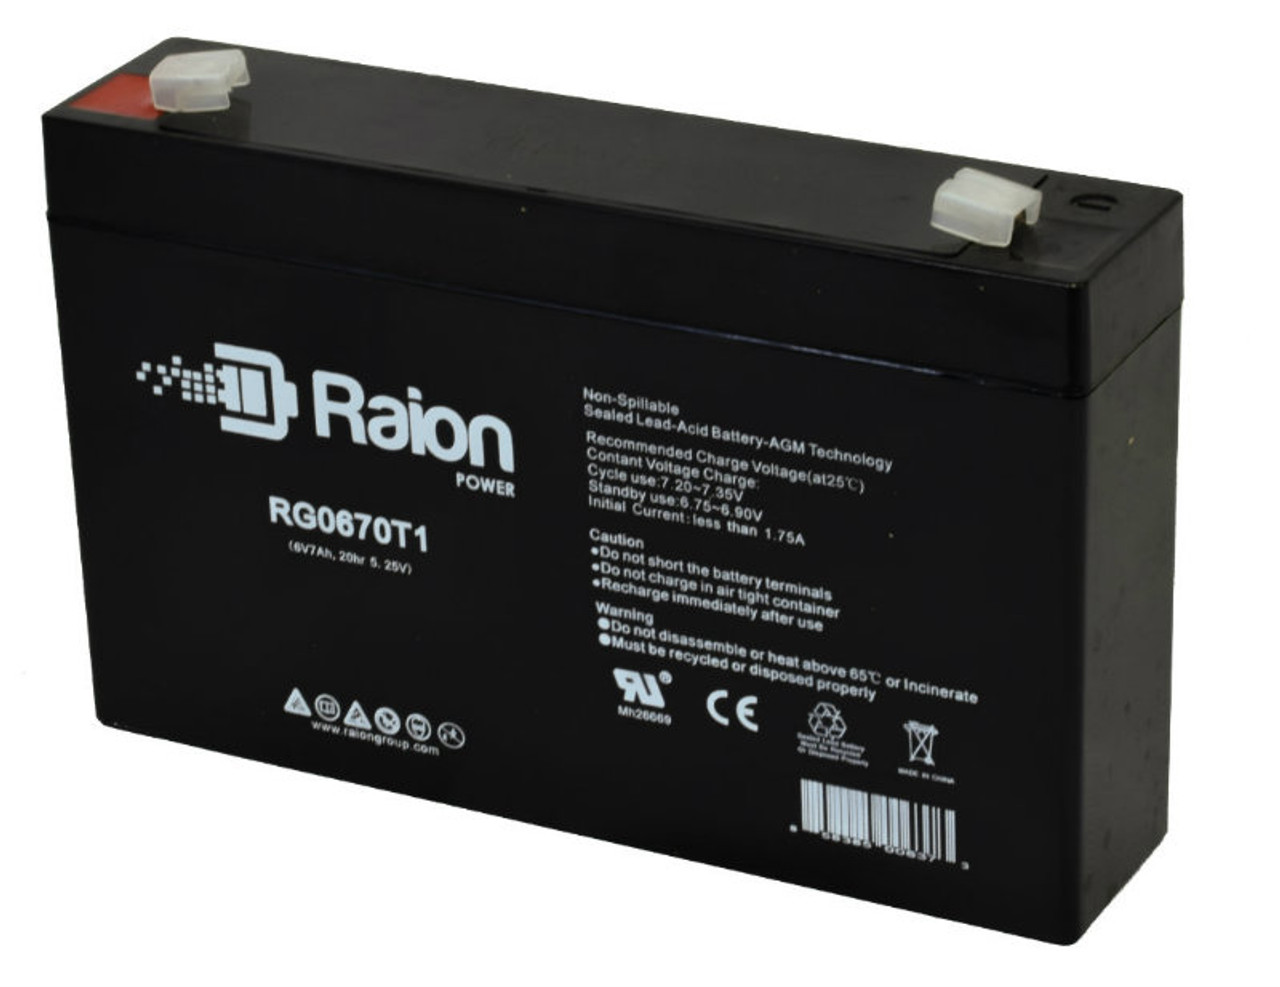 Raion Power RG0670T1 6V 7Ah Replacement Emergency Light Battery for National Power Corporation GS013P2